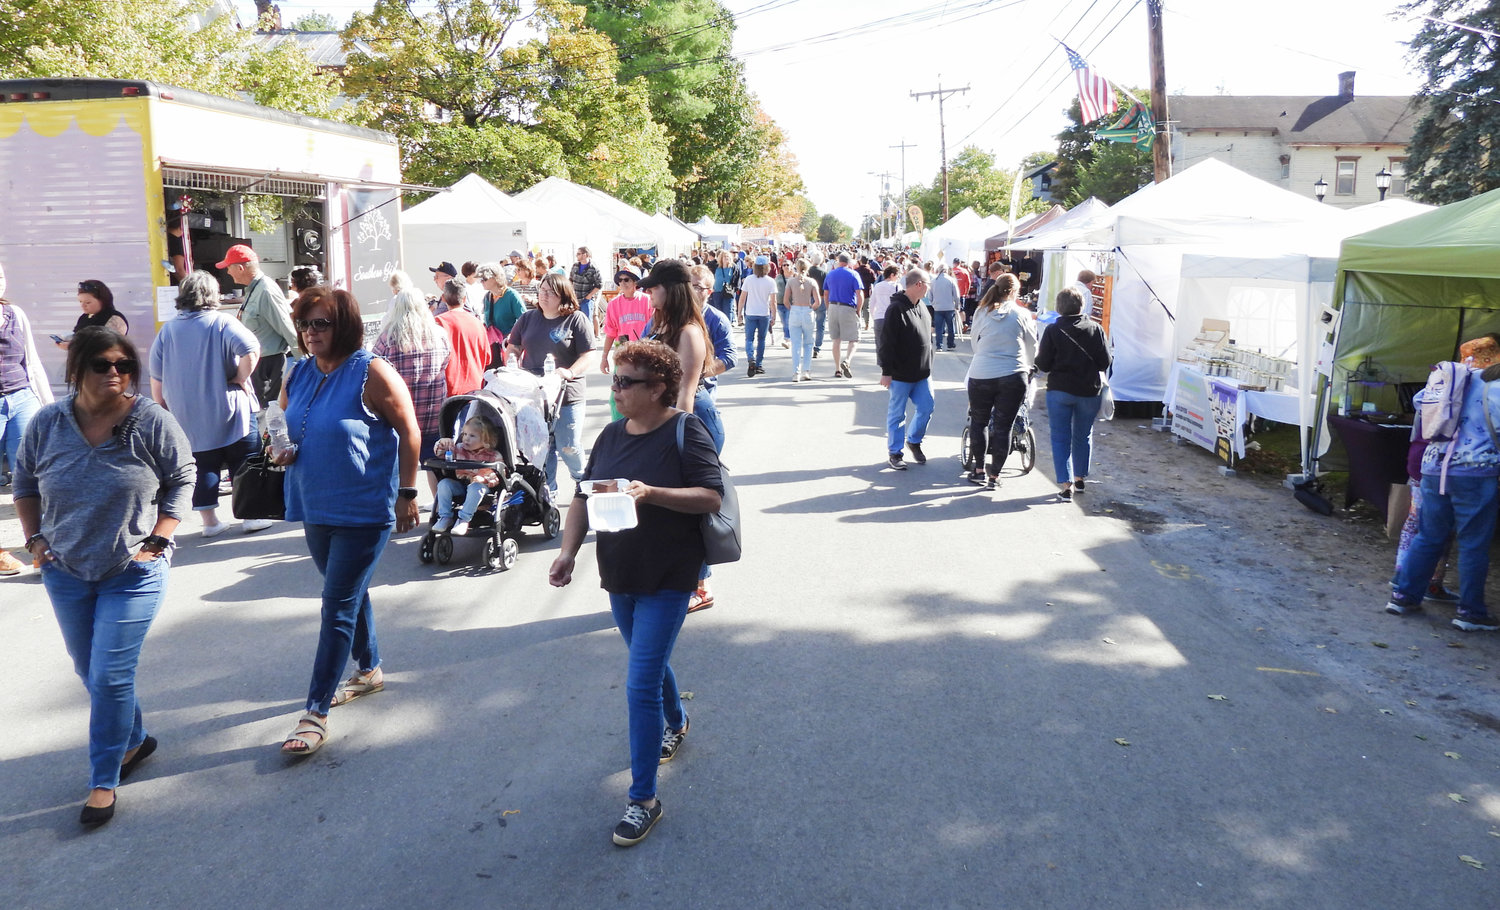 The Remsen Barn Festival of the Arts saw Main Street packed with people looking to sample good foods and take home unique arts and crafts on Saturday, Sept. 24 in the town of Remsen.